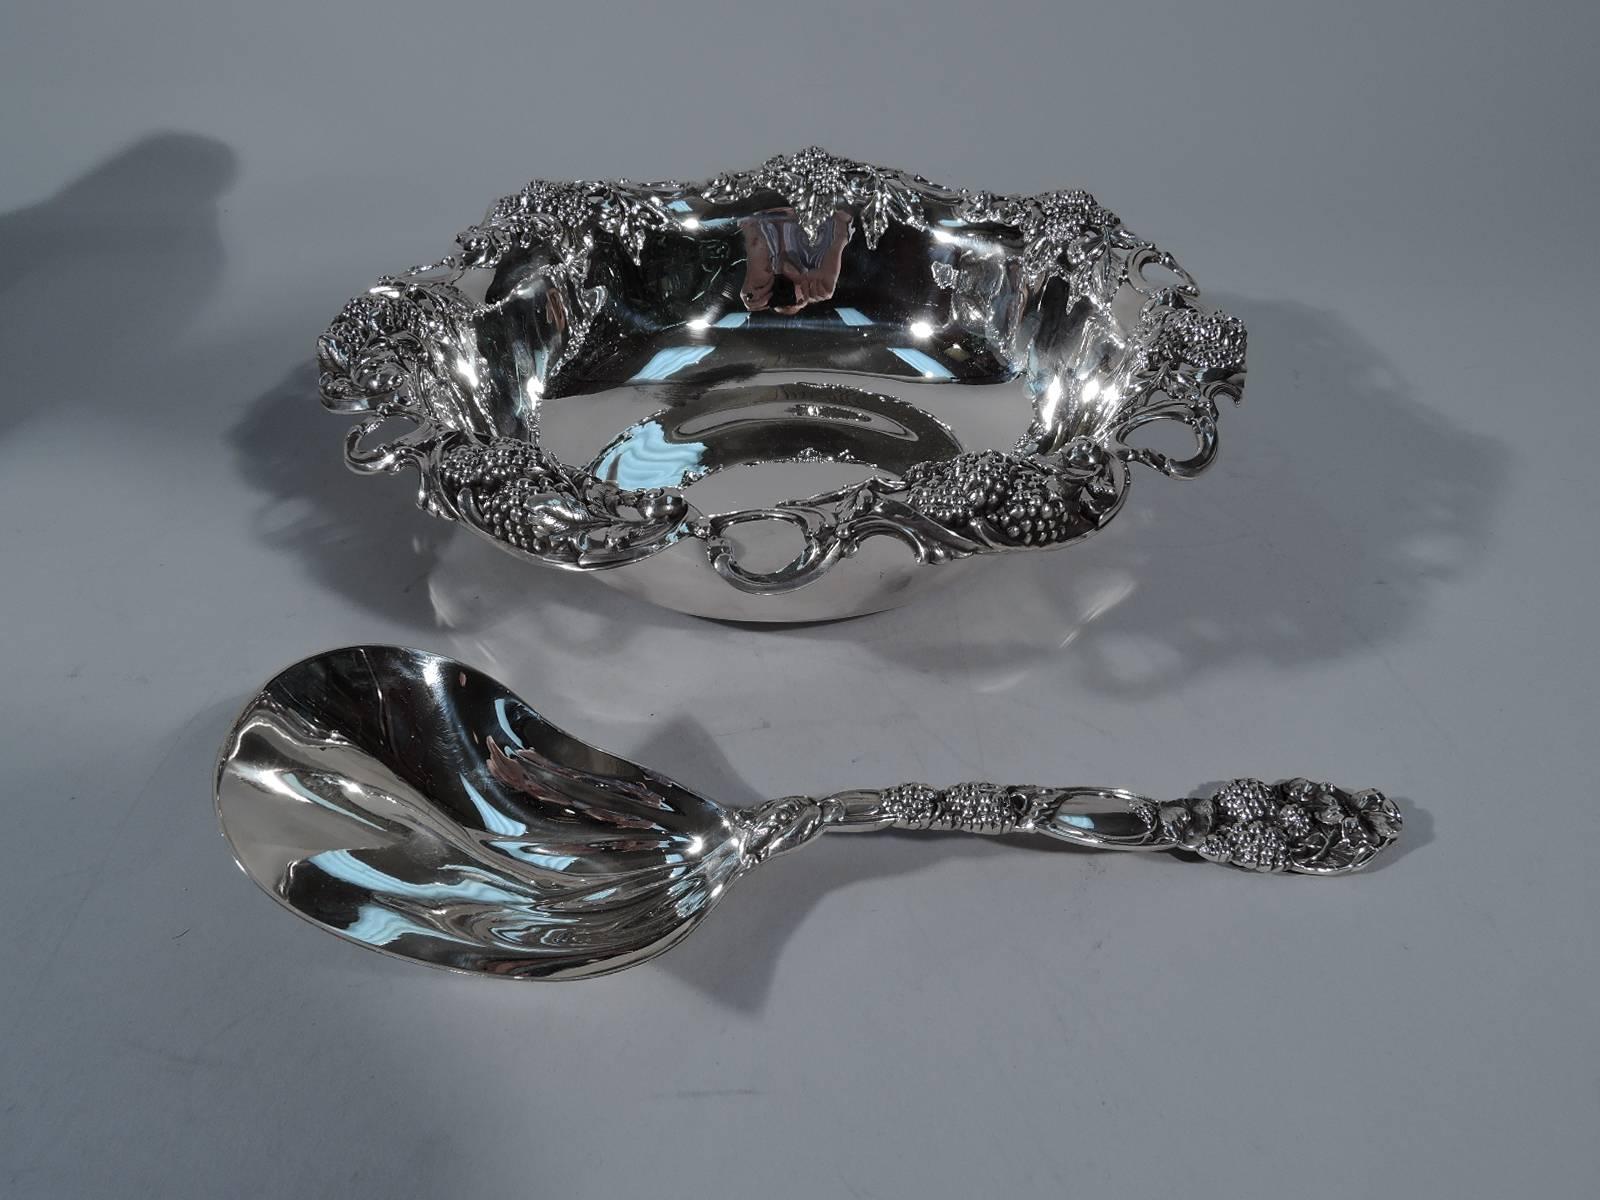 Sterling silver berry bowl with spoon. Made by Tiffany & Co. in New York, circa 1905. Bowl: Round with gently curved sides. Turned-down and pierced rim has bunches of succulent berries alternating with open scrolls. Spoon: Same motif with flower